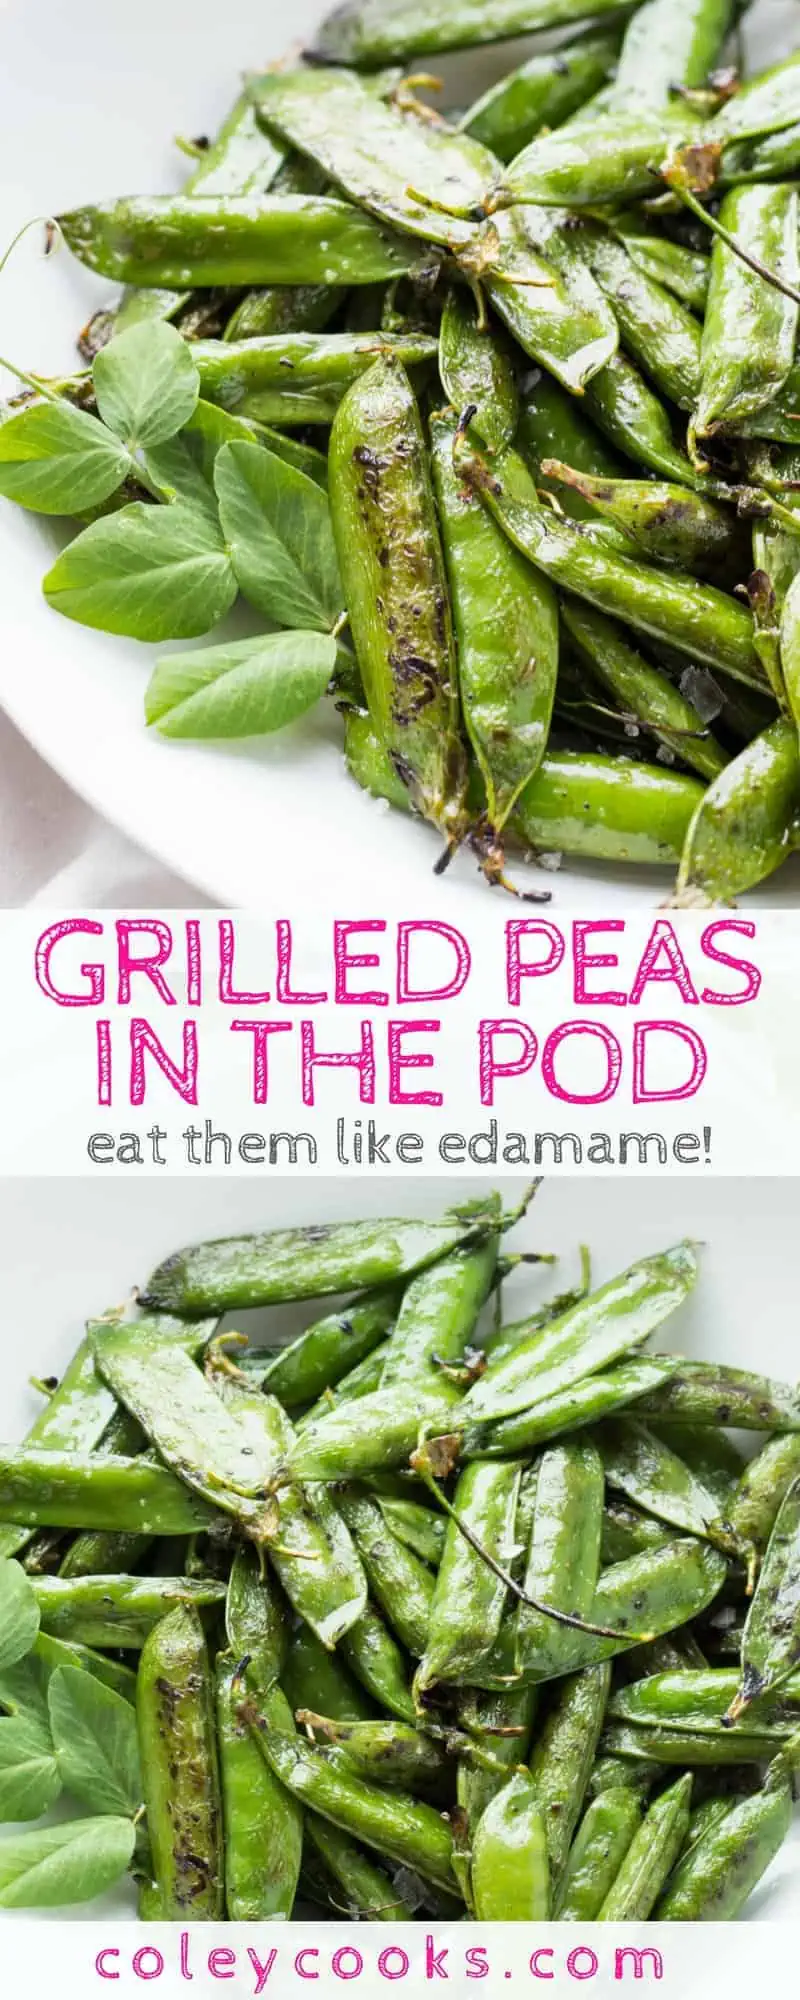 GRILLED PEAS IN THE POD | Easiest ever recipe for salted grilled peas in the pod. Eat them like edamame for a sweet, healthy, delicious snack! The best healthy snack recipe. Healthy snacking ideas! #glutenfree #vegan | ColeyCooks.com